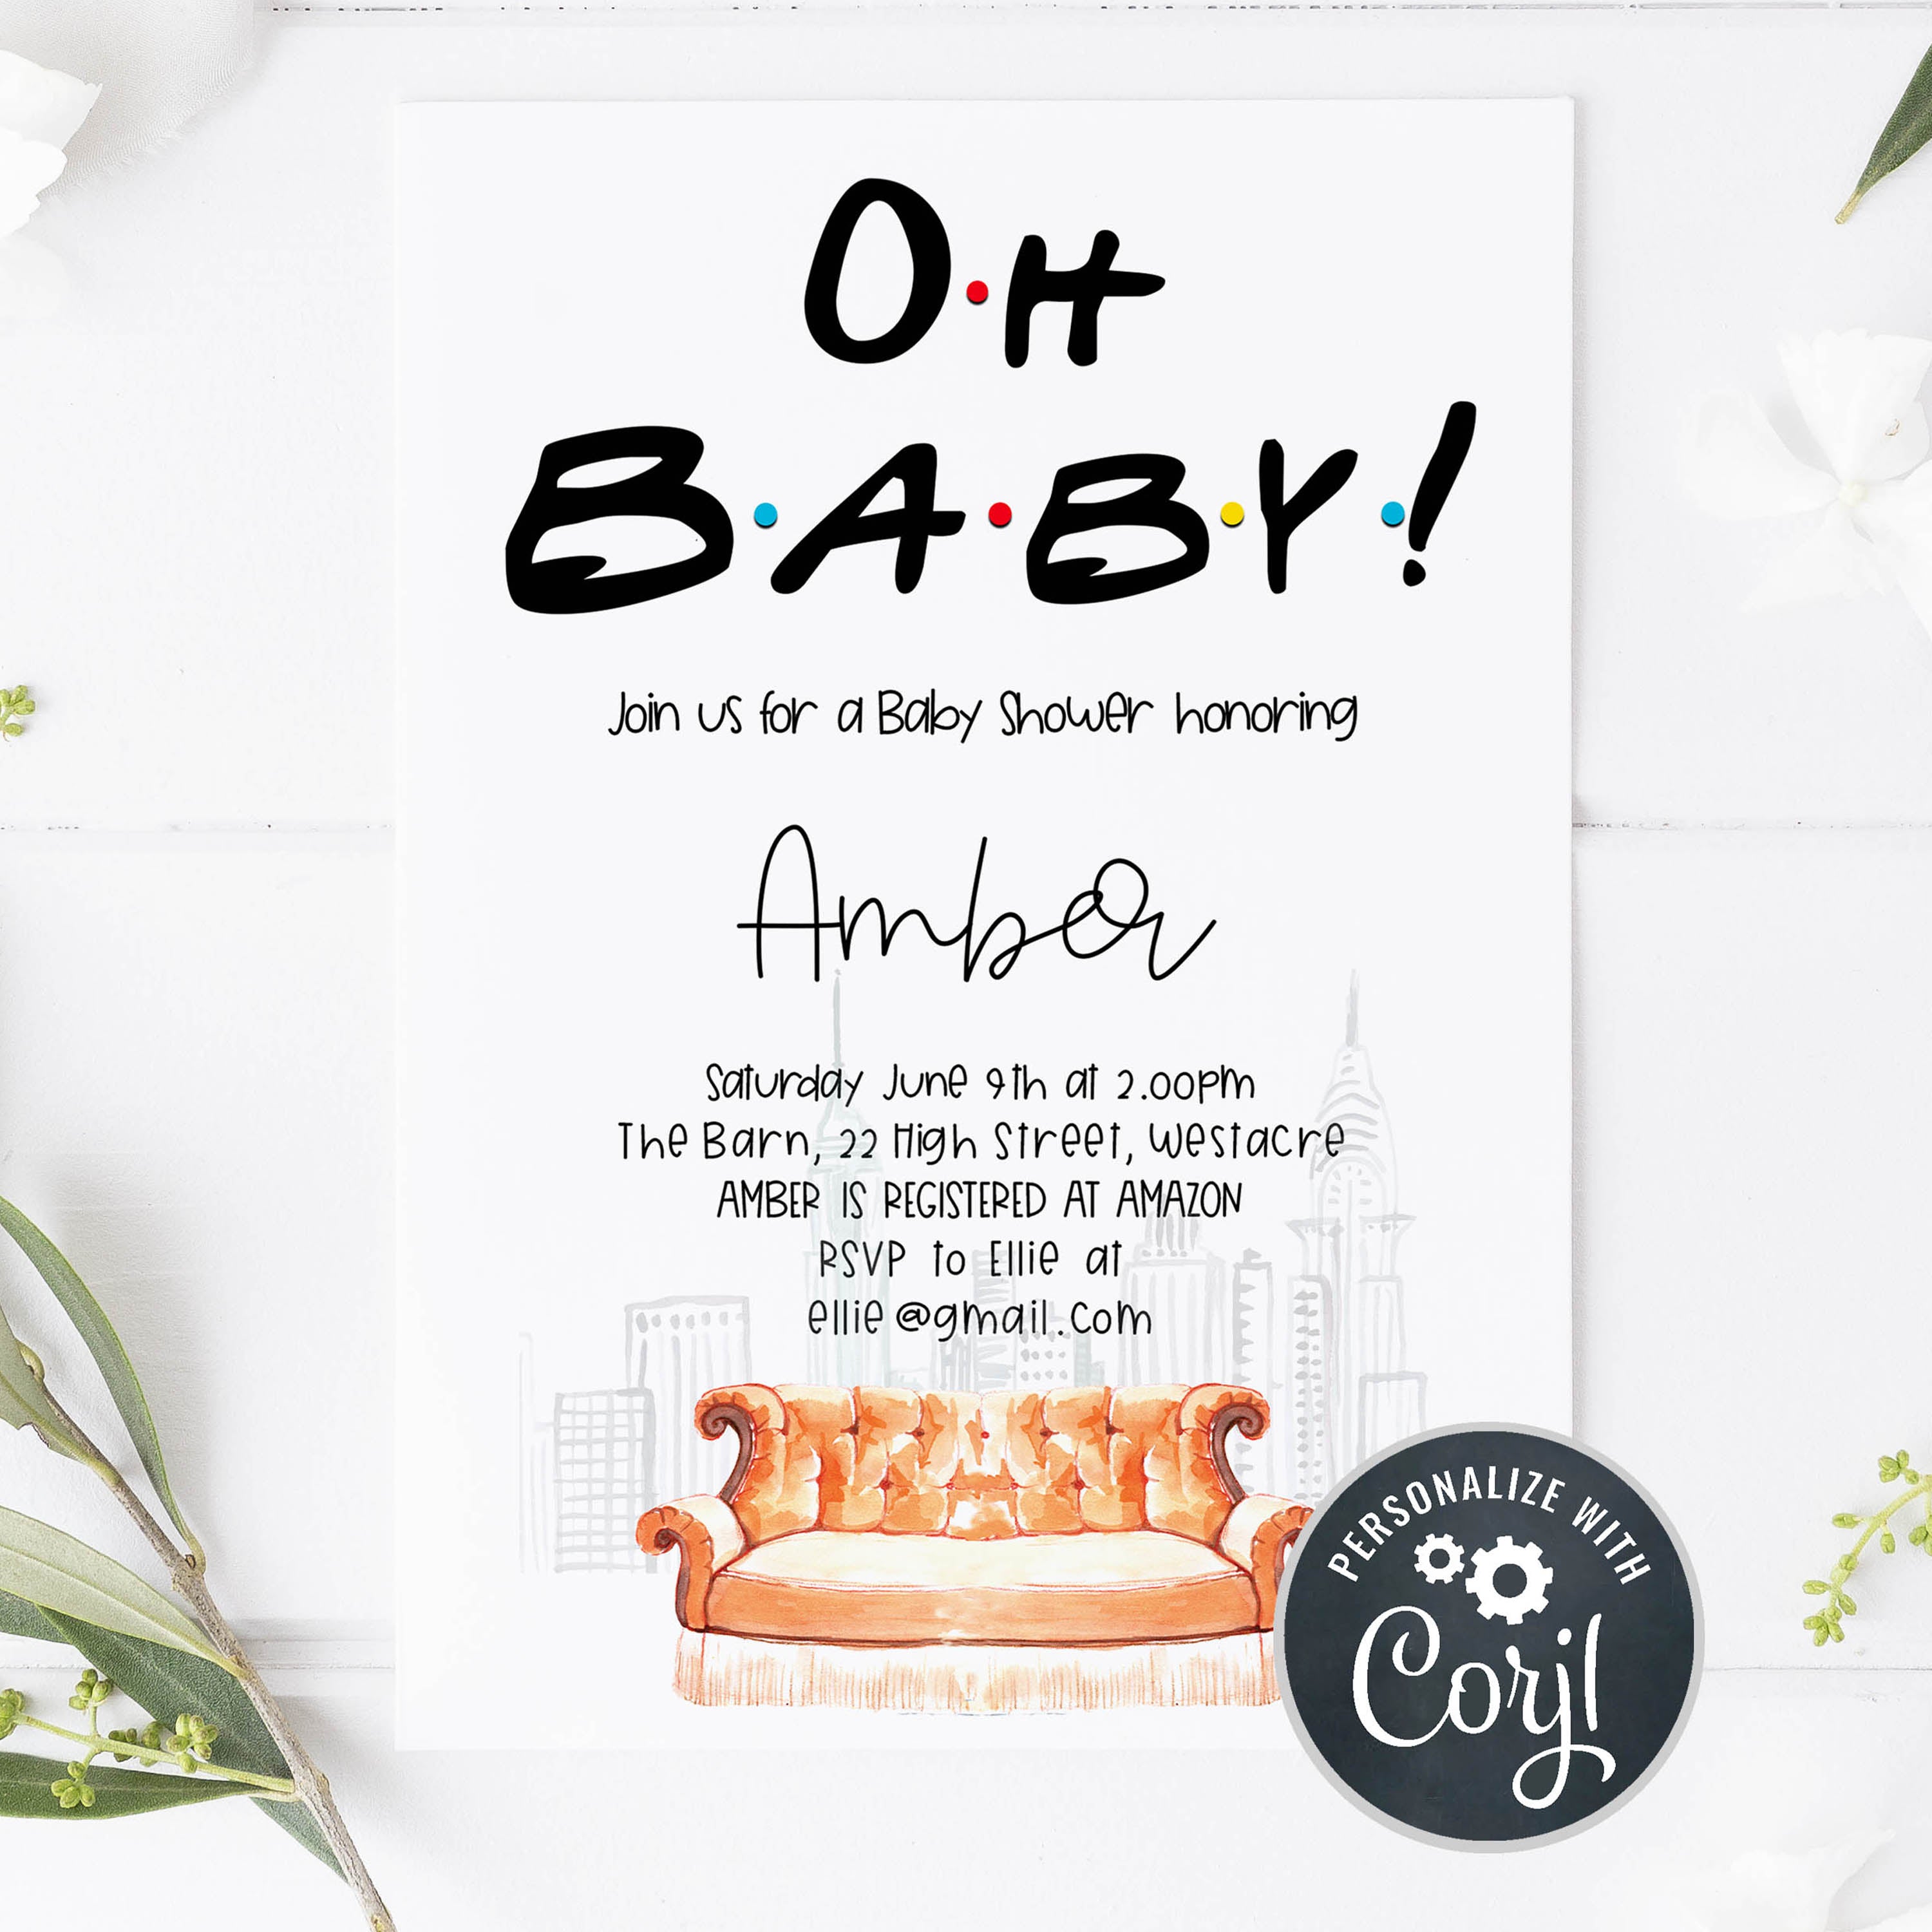 editable oh baby baby shower invitation, friends baby shower invitation, baby shower invitations, editable baby shower invite, friends baby shower theme, friends